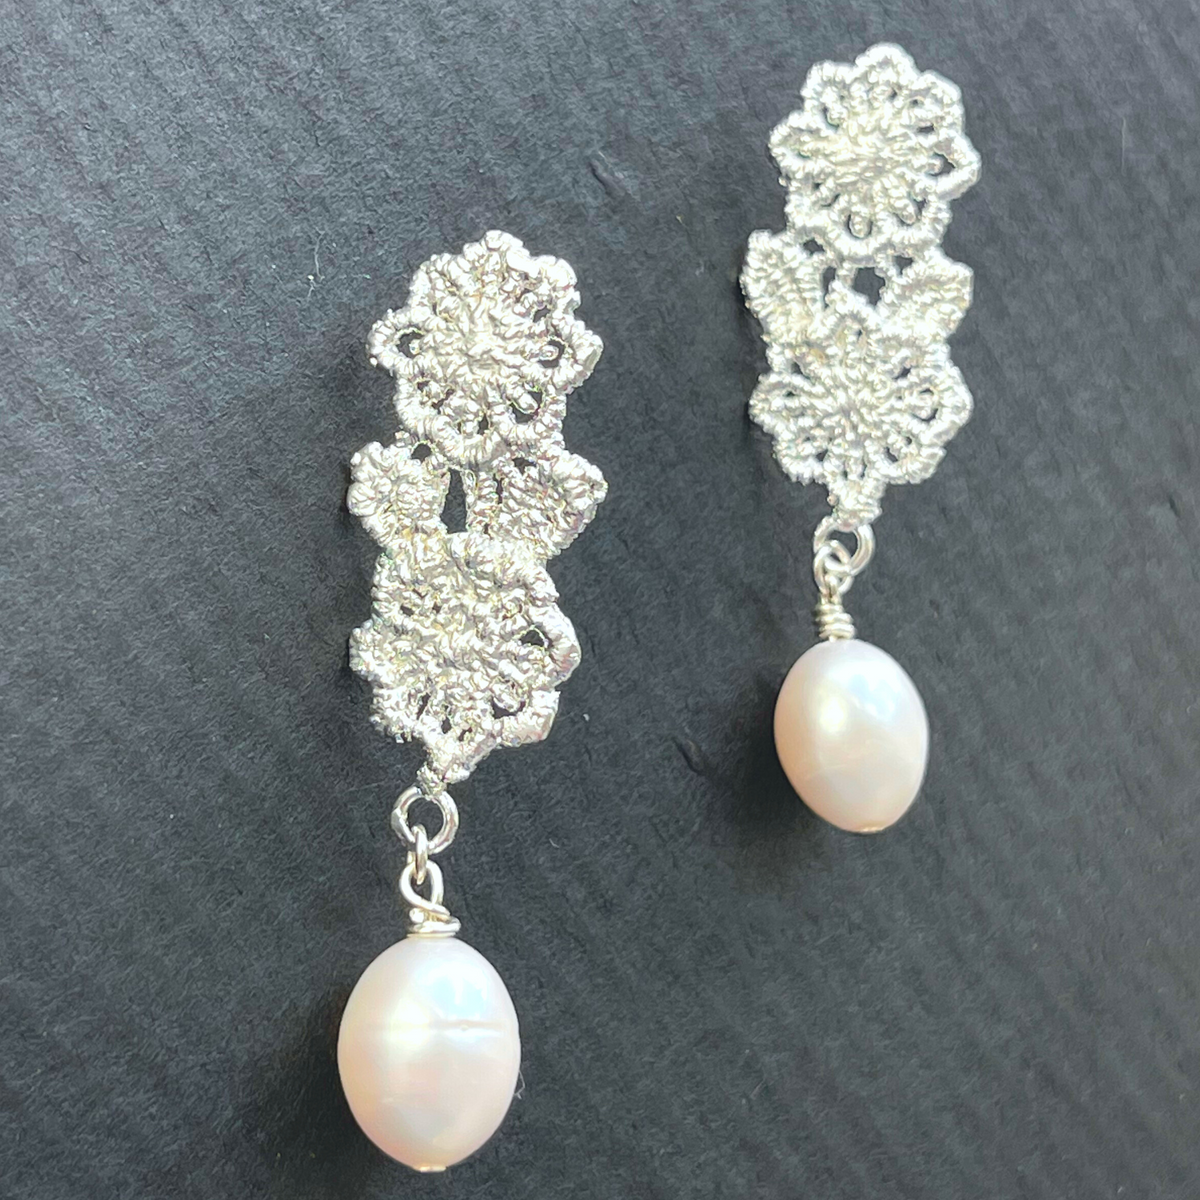 Pearl and Lace Jewelry - Monika Knutsson